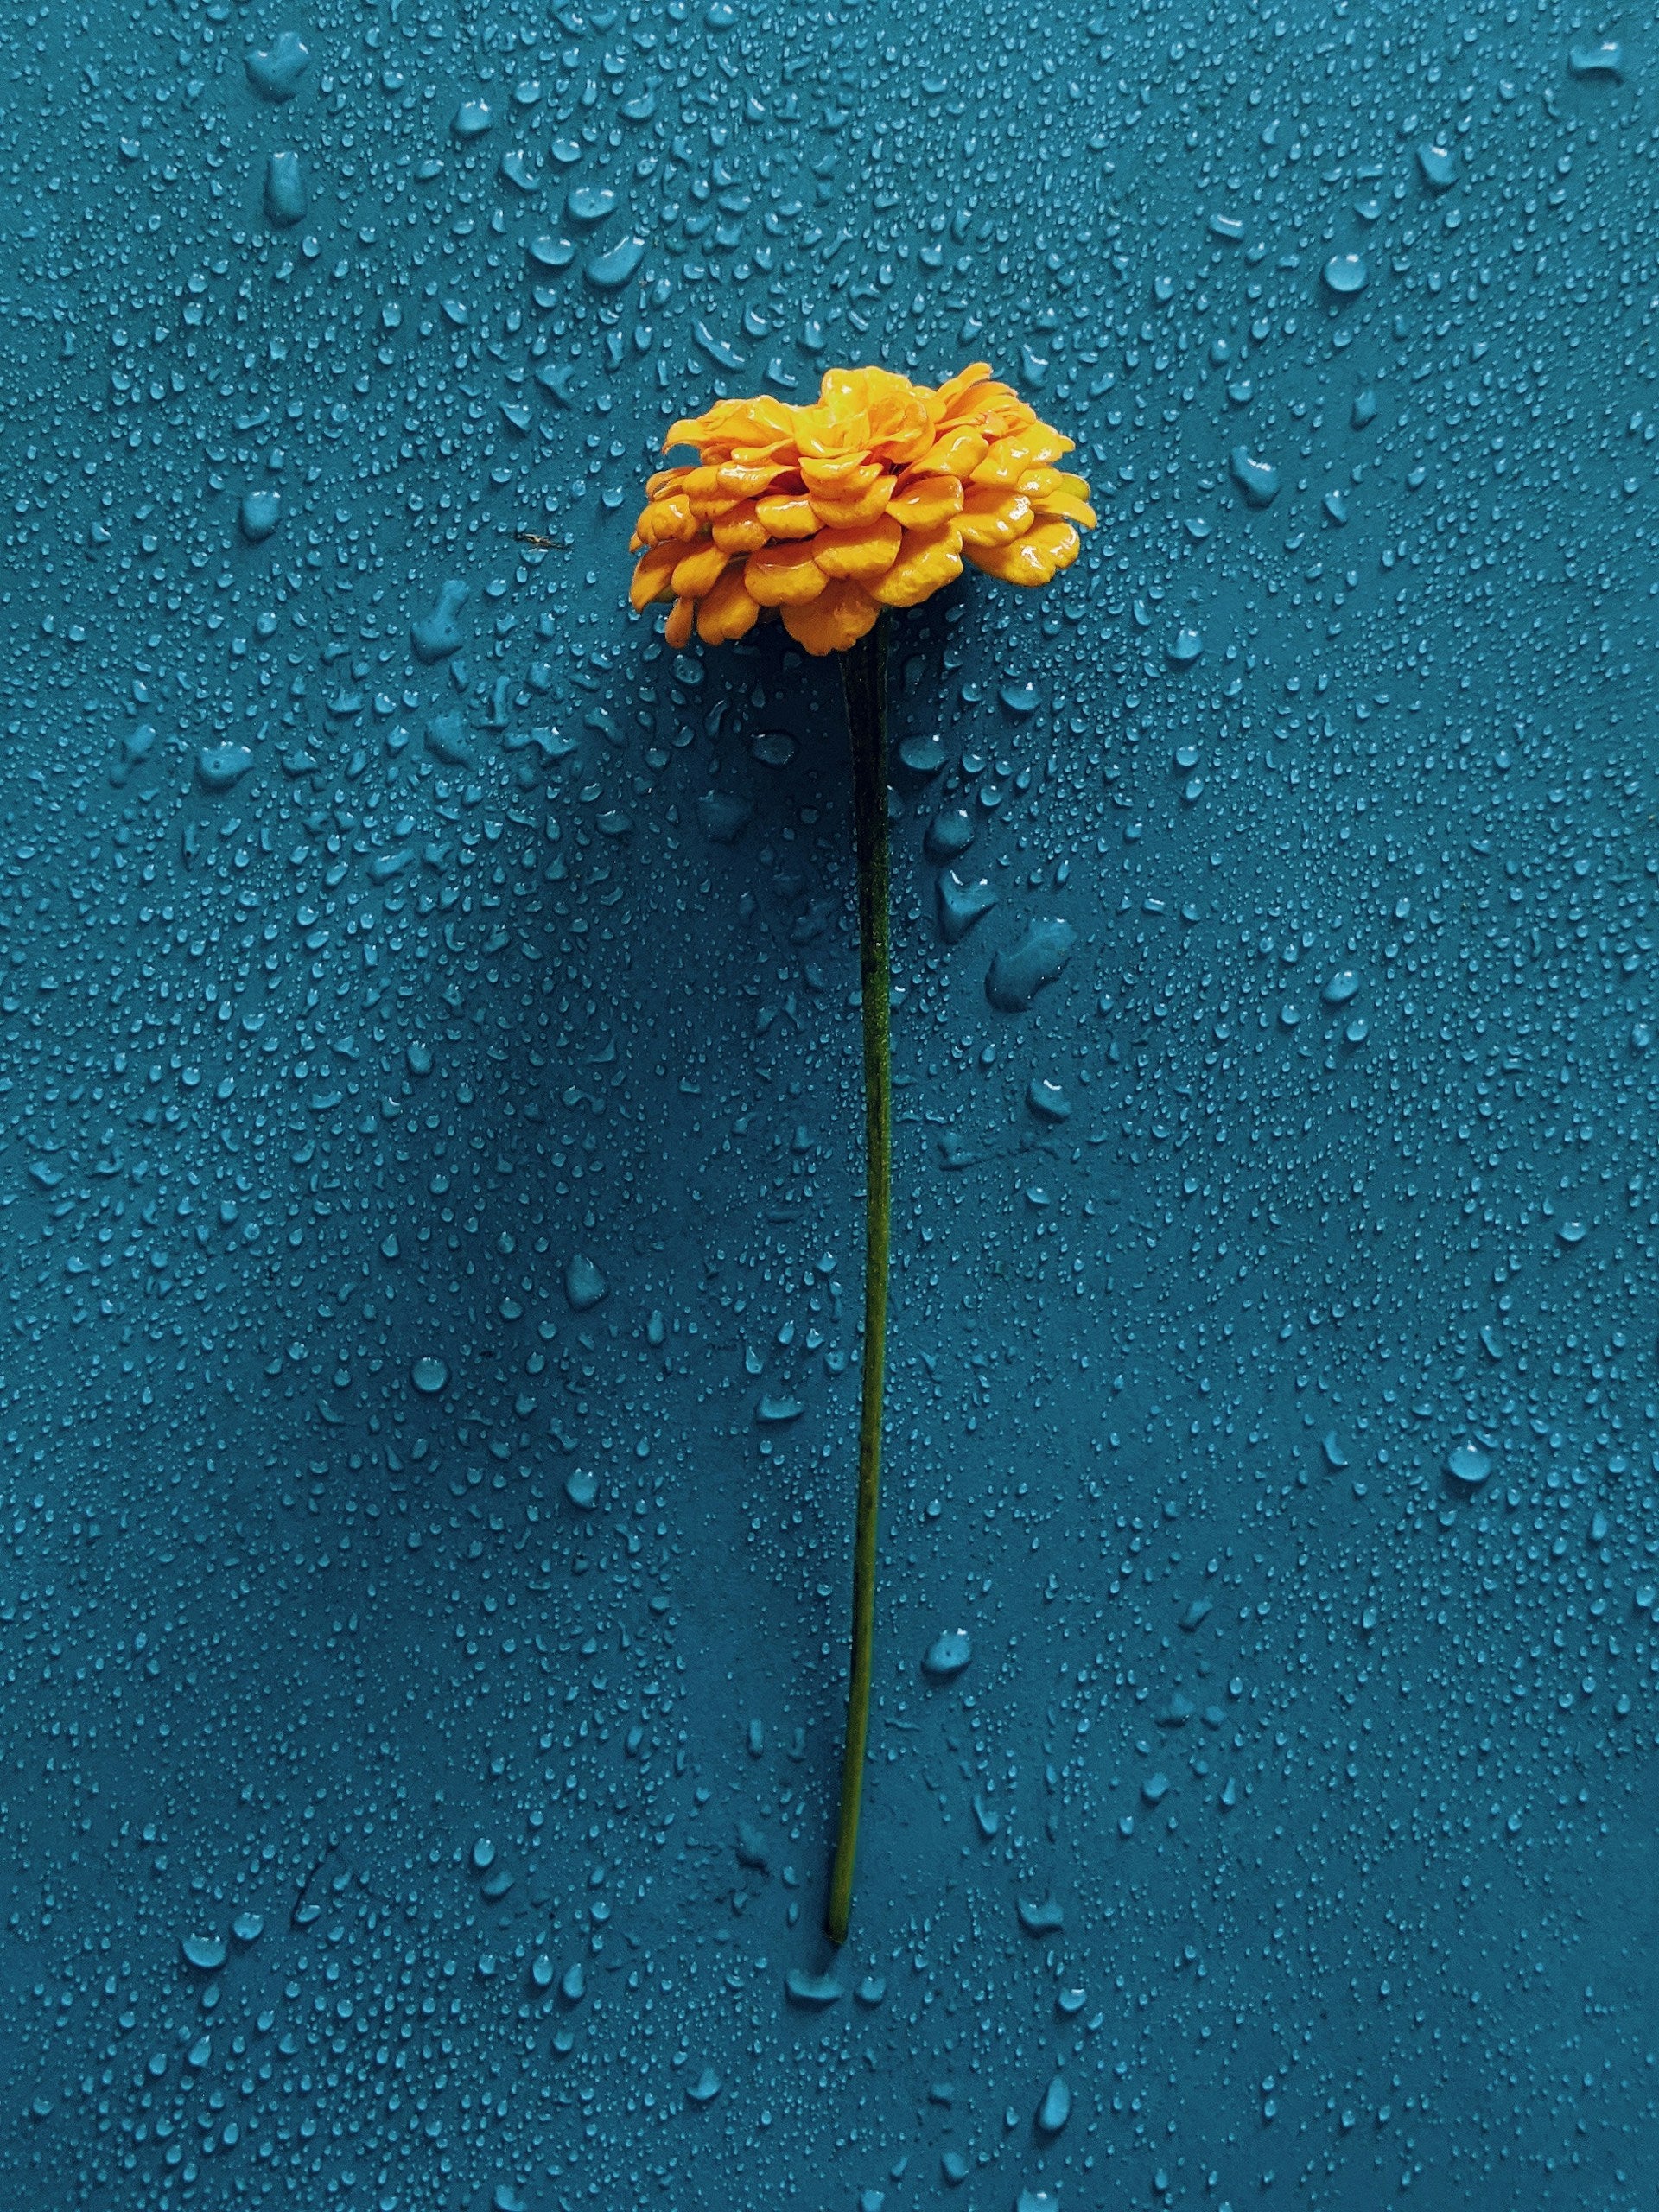 A yellow flower on a wet blue surface.